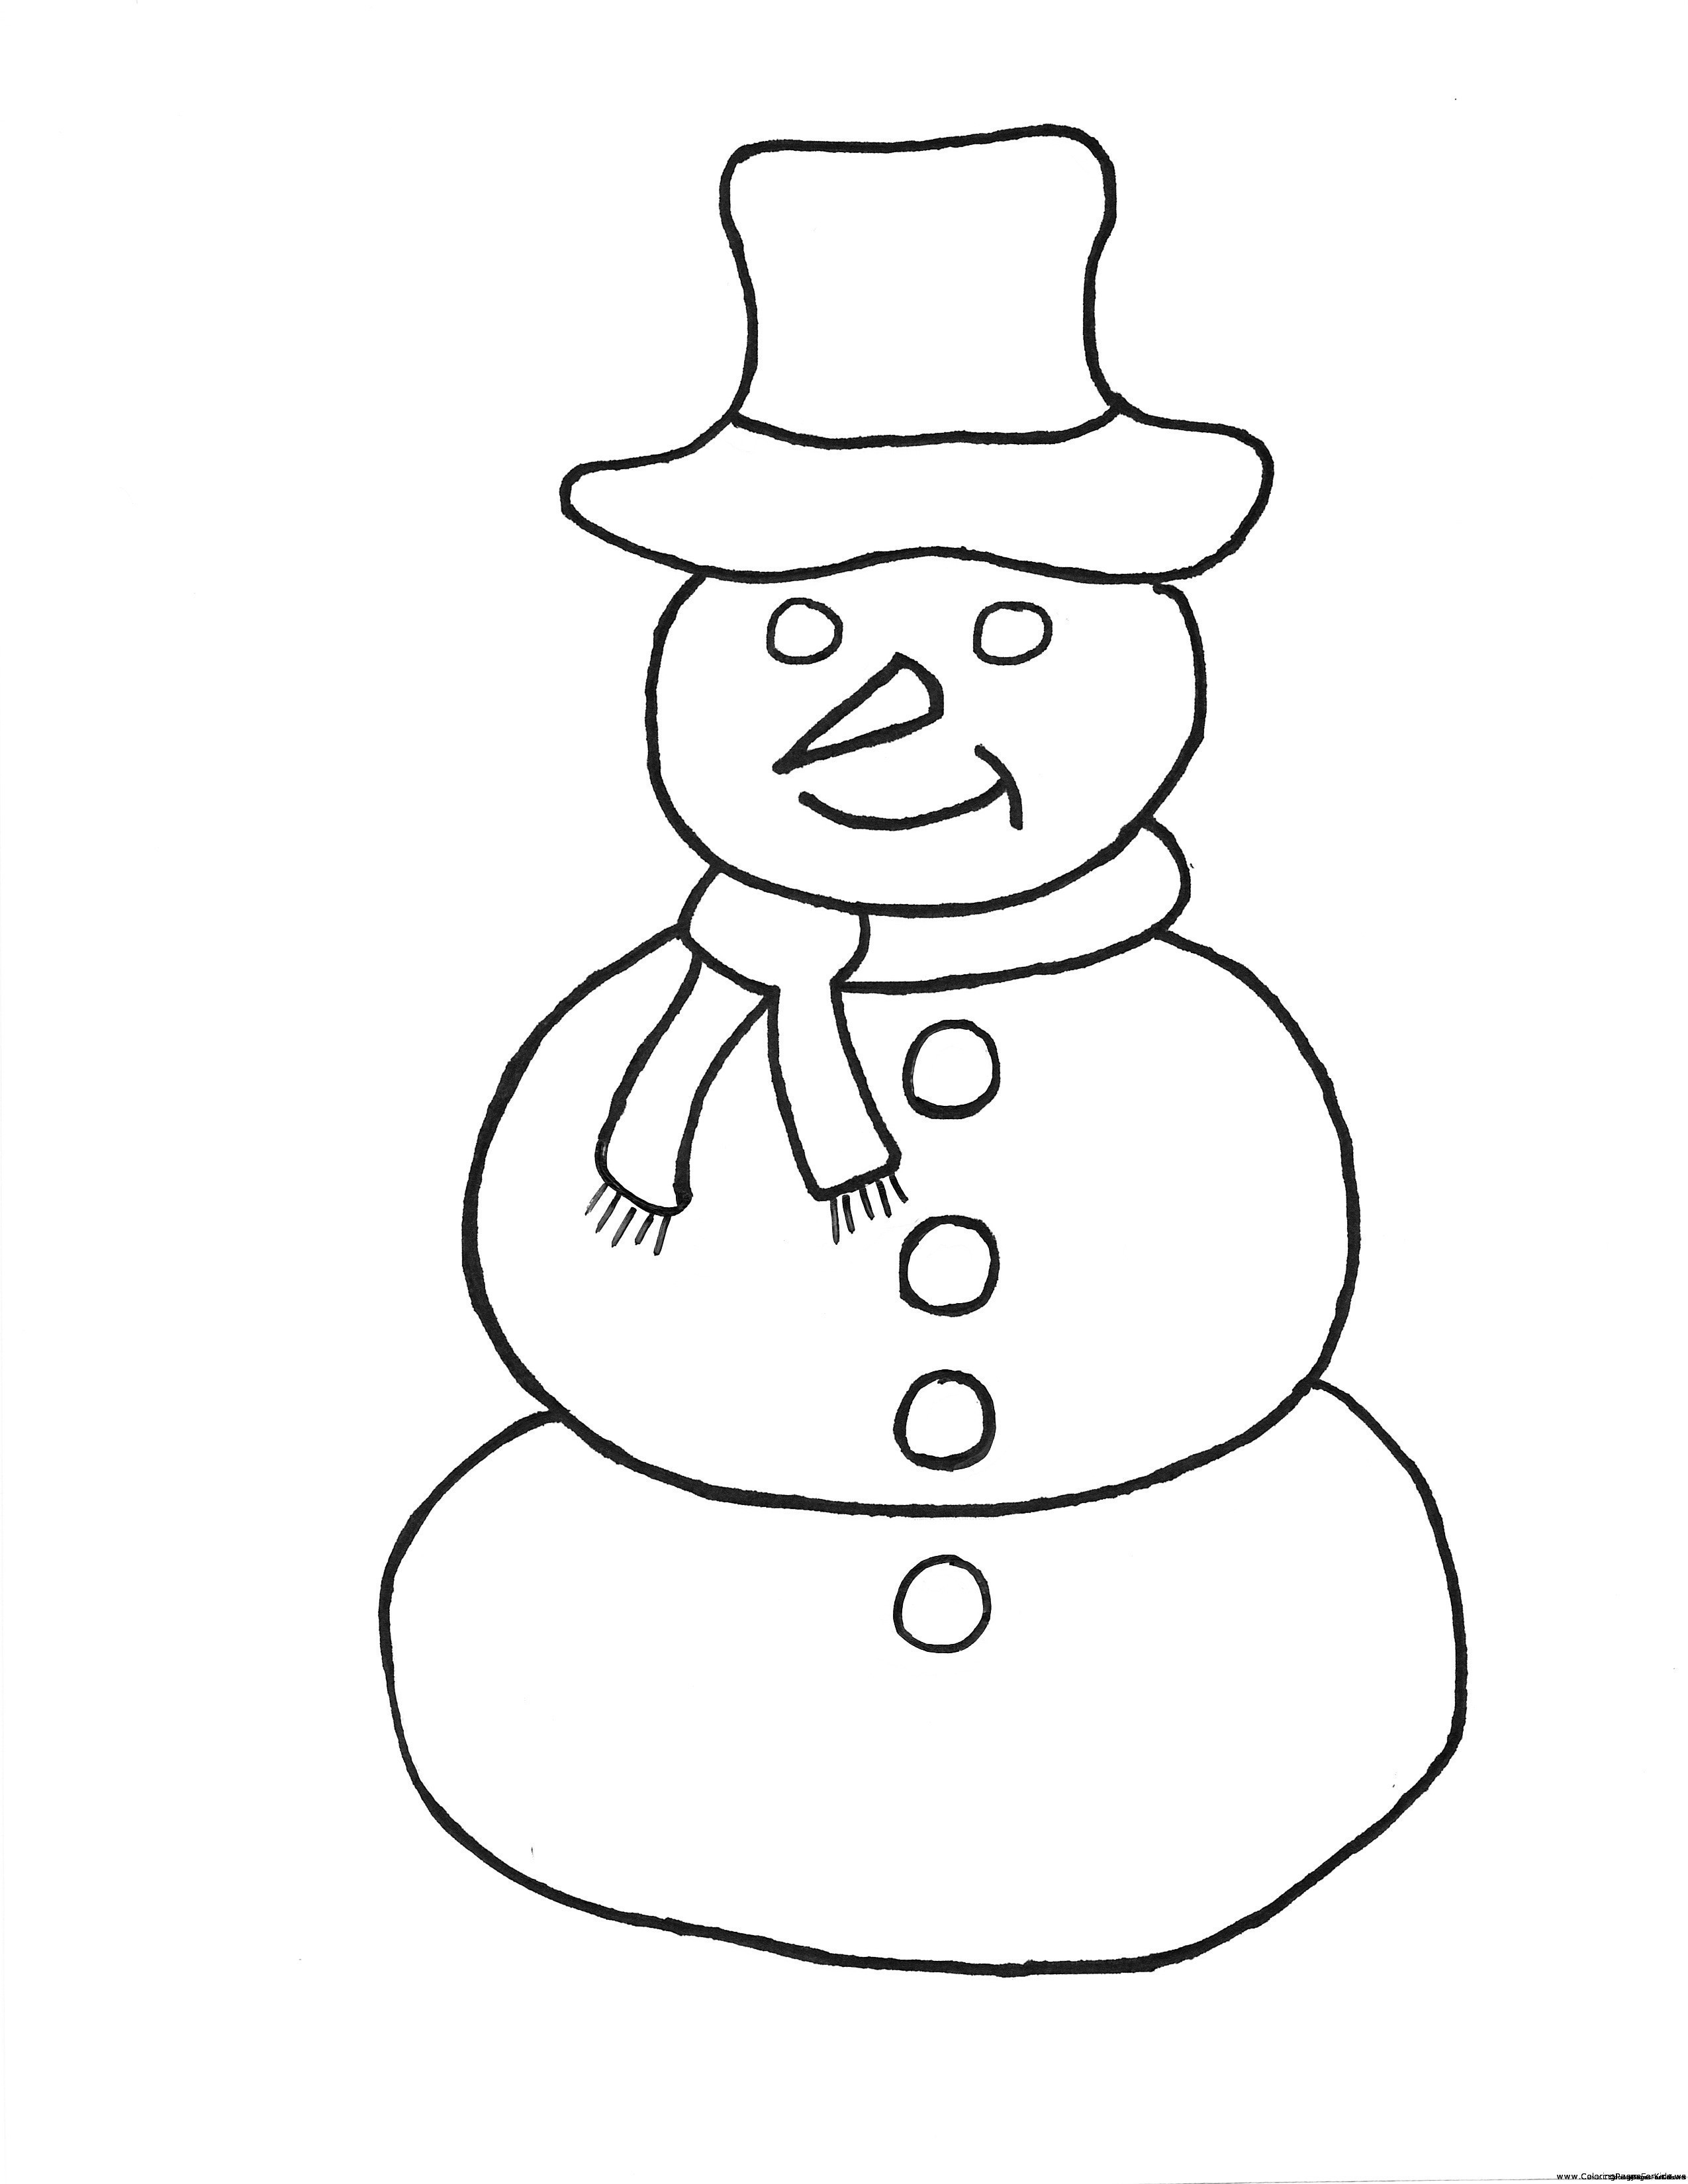 Coloring Pages Of Snowmen Easy Snowman Coloring Pages At Getdrawings Free For Personal